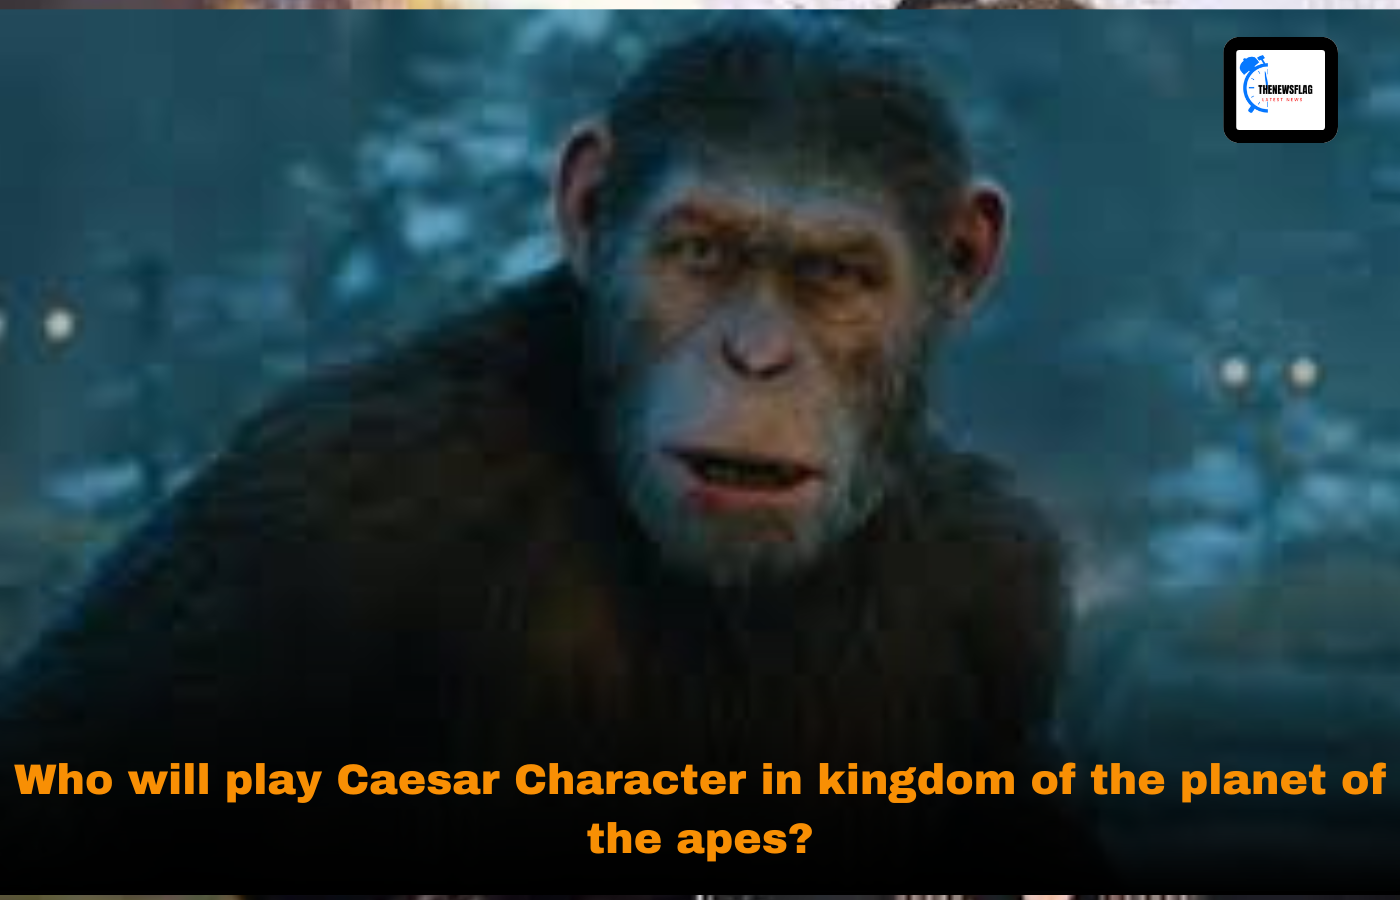 Who will play Caesar Character in kingdom of the planet of the apes?